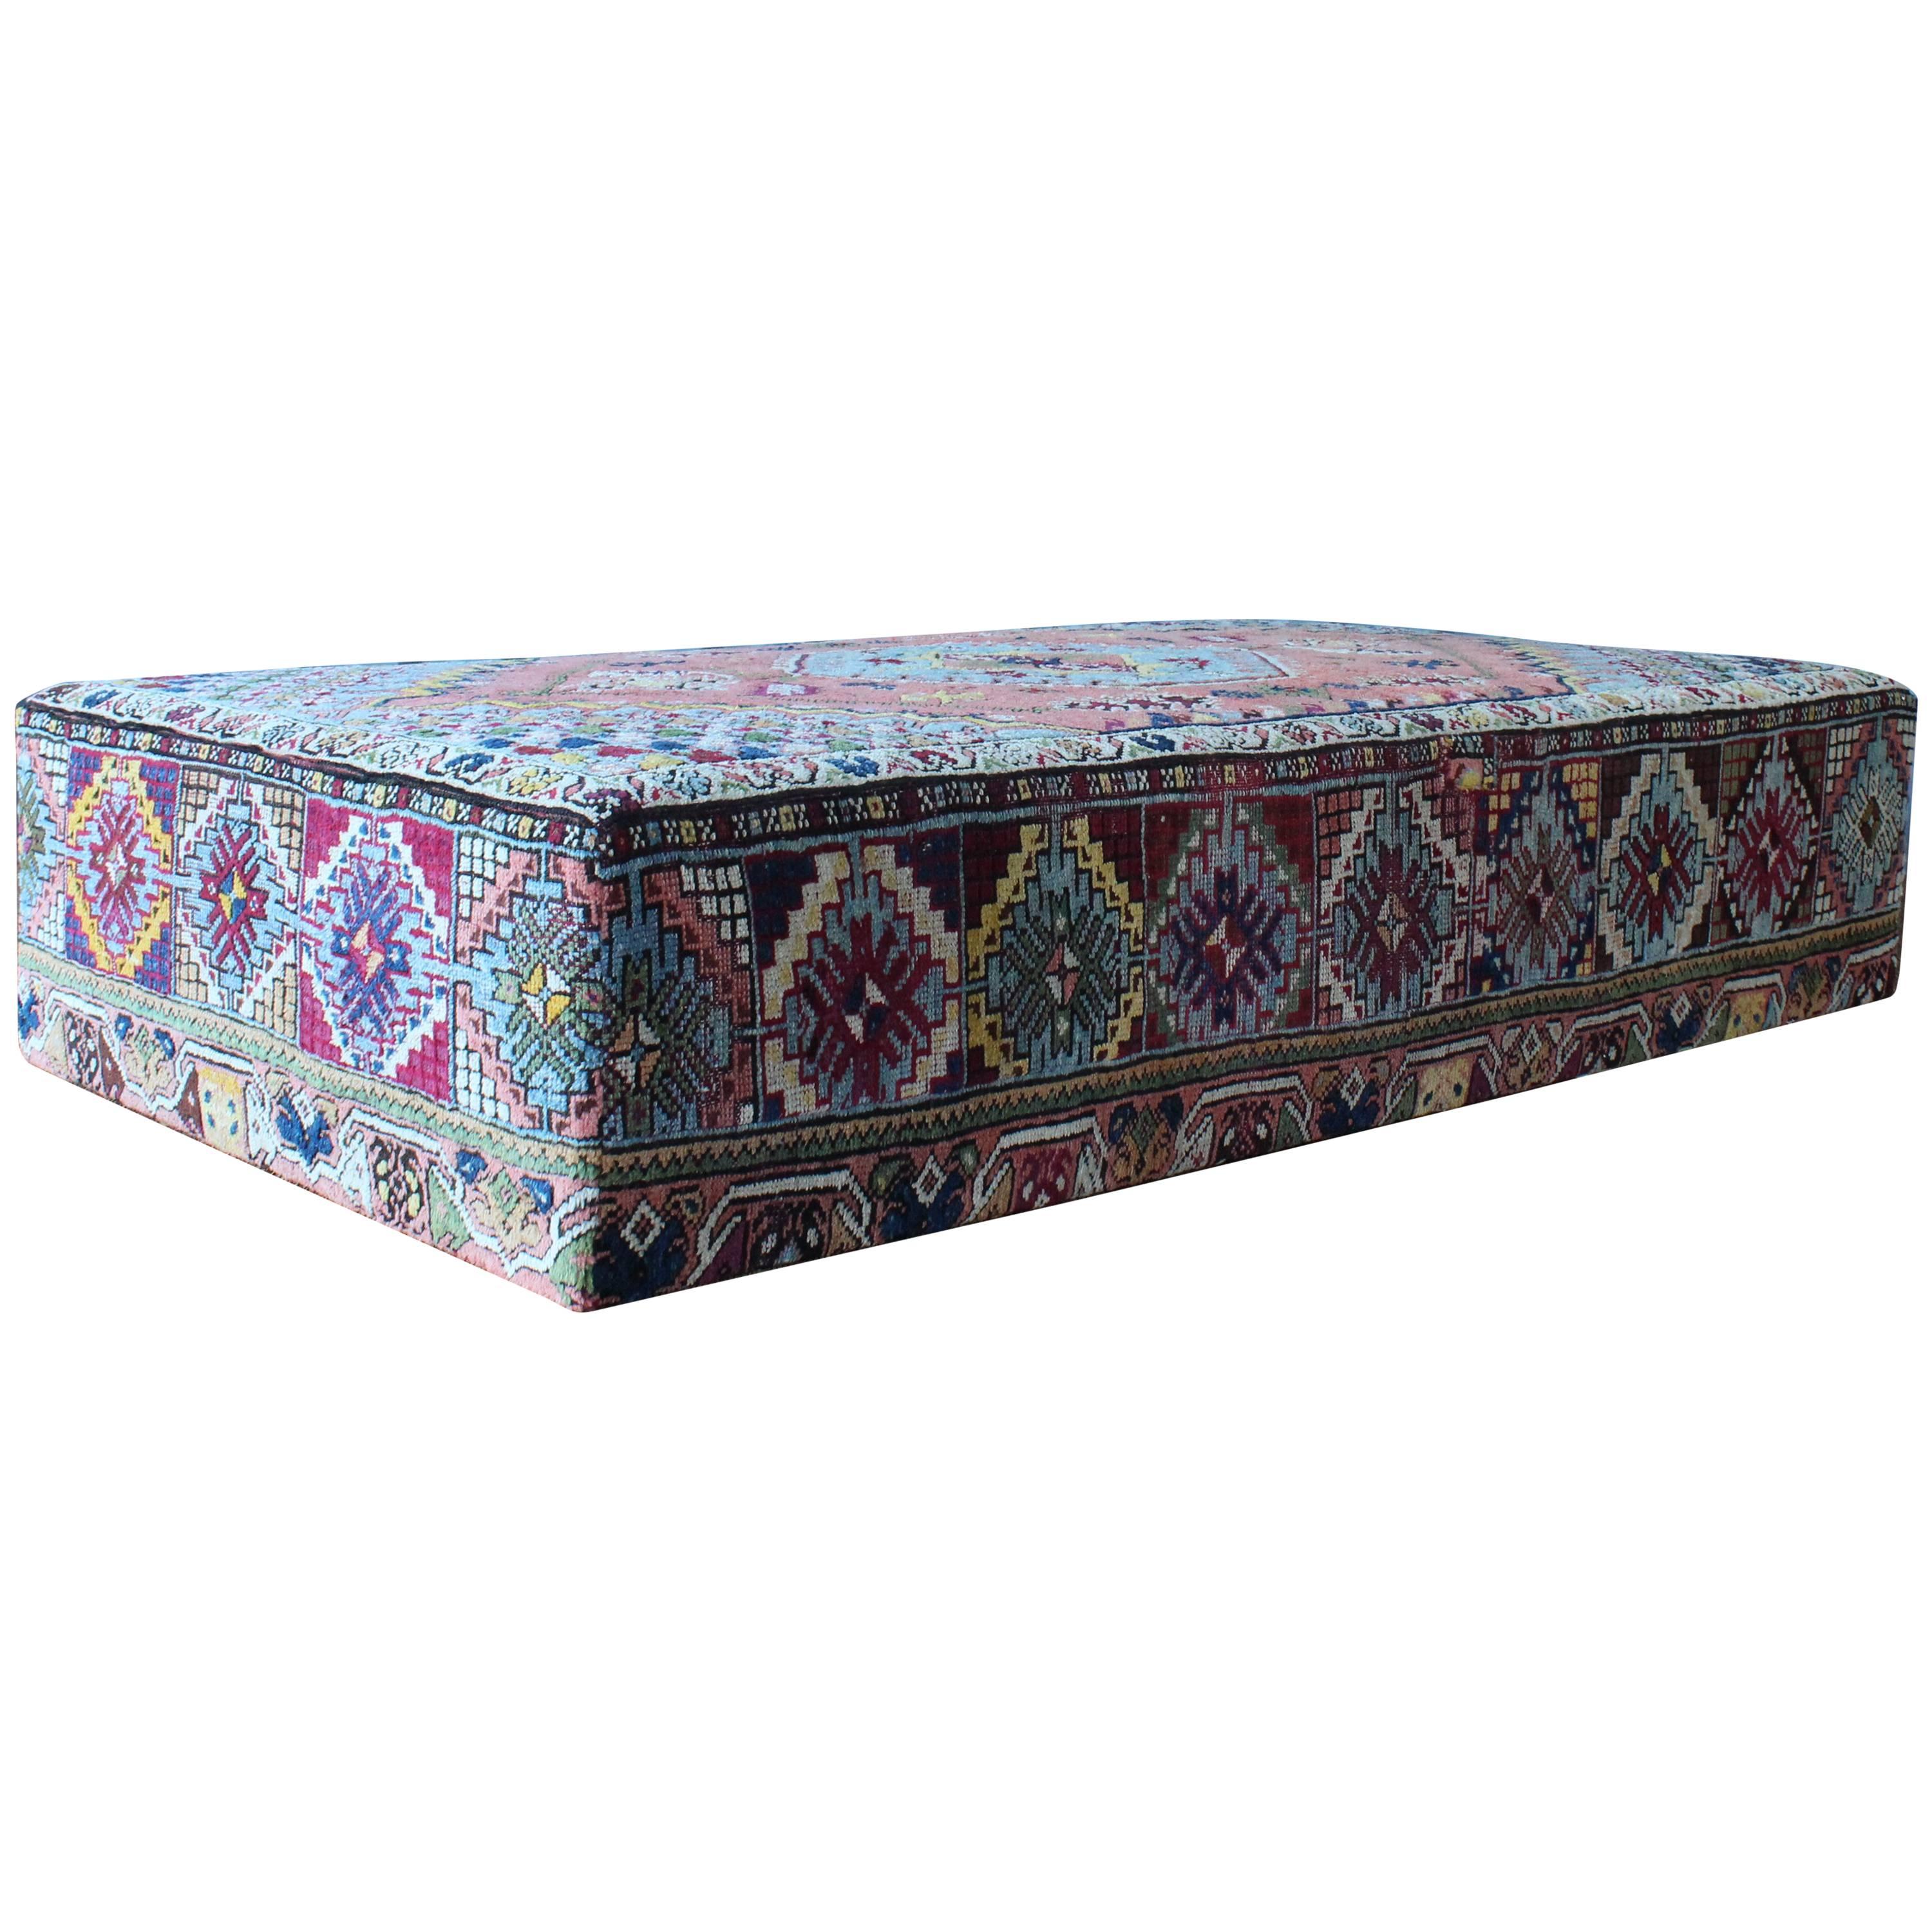 Custom-Made Ottoman Upholstered in a Vintage Turkish Rug